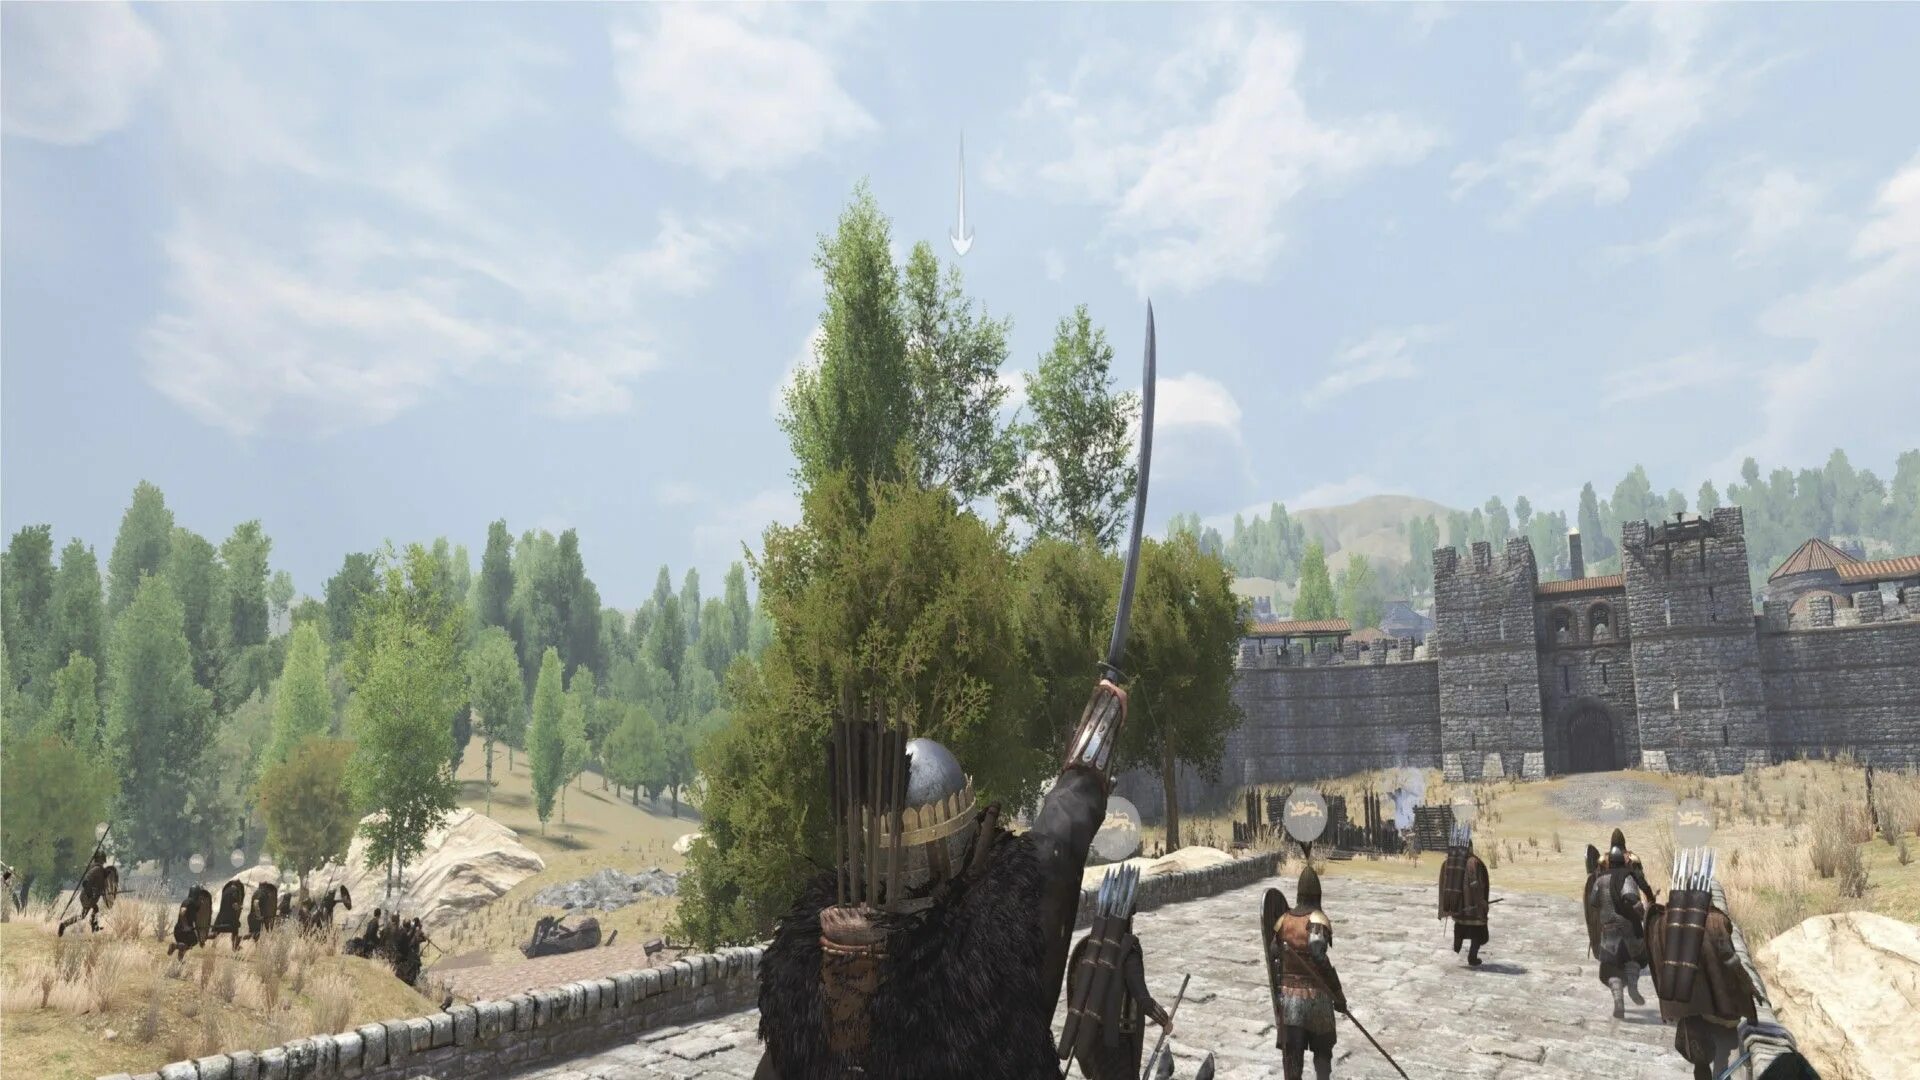 Мастерские mount and bannerlord 2. Mount and Blade 2 Bannerlord. Mount and Blade 2 Bannerlord старт. Mount & Blade II: Bannerlord (2022) PC. Mount and Blade 2 Bannerlord аваситон.